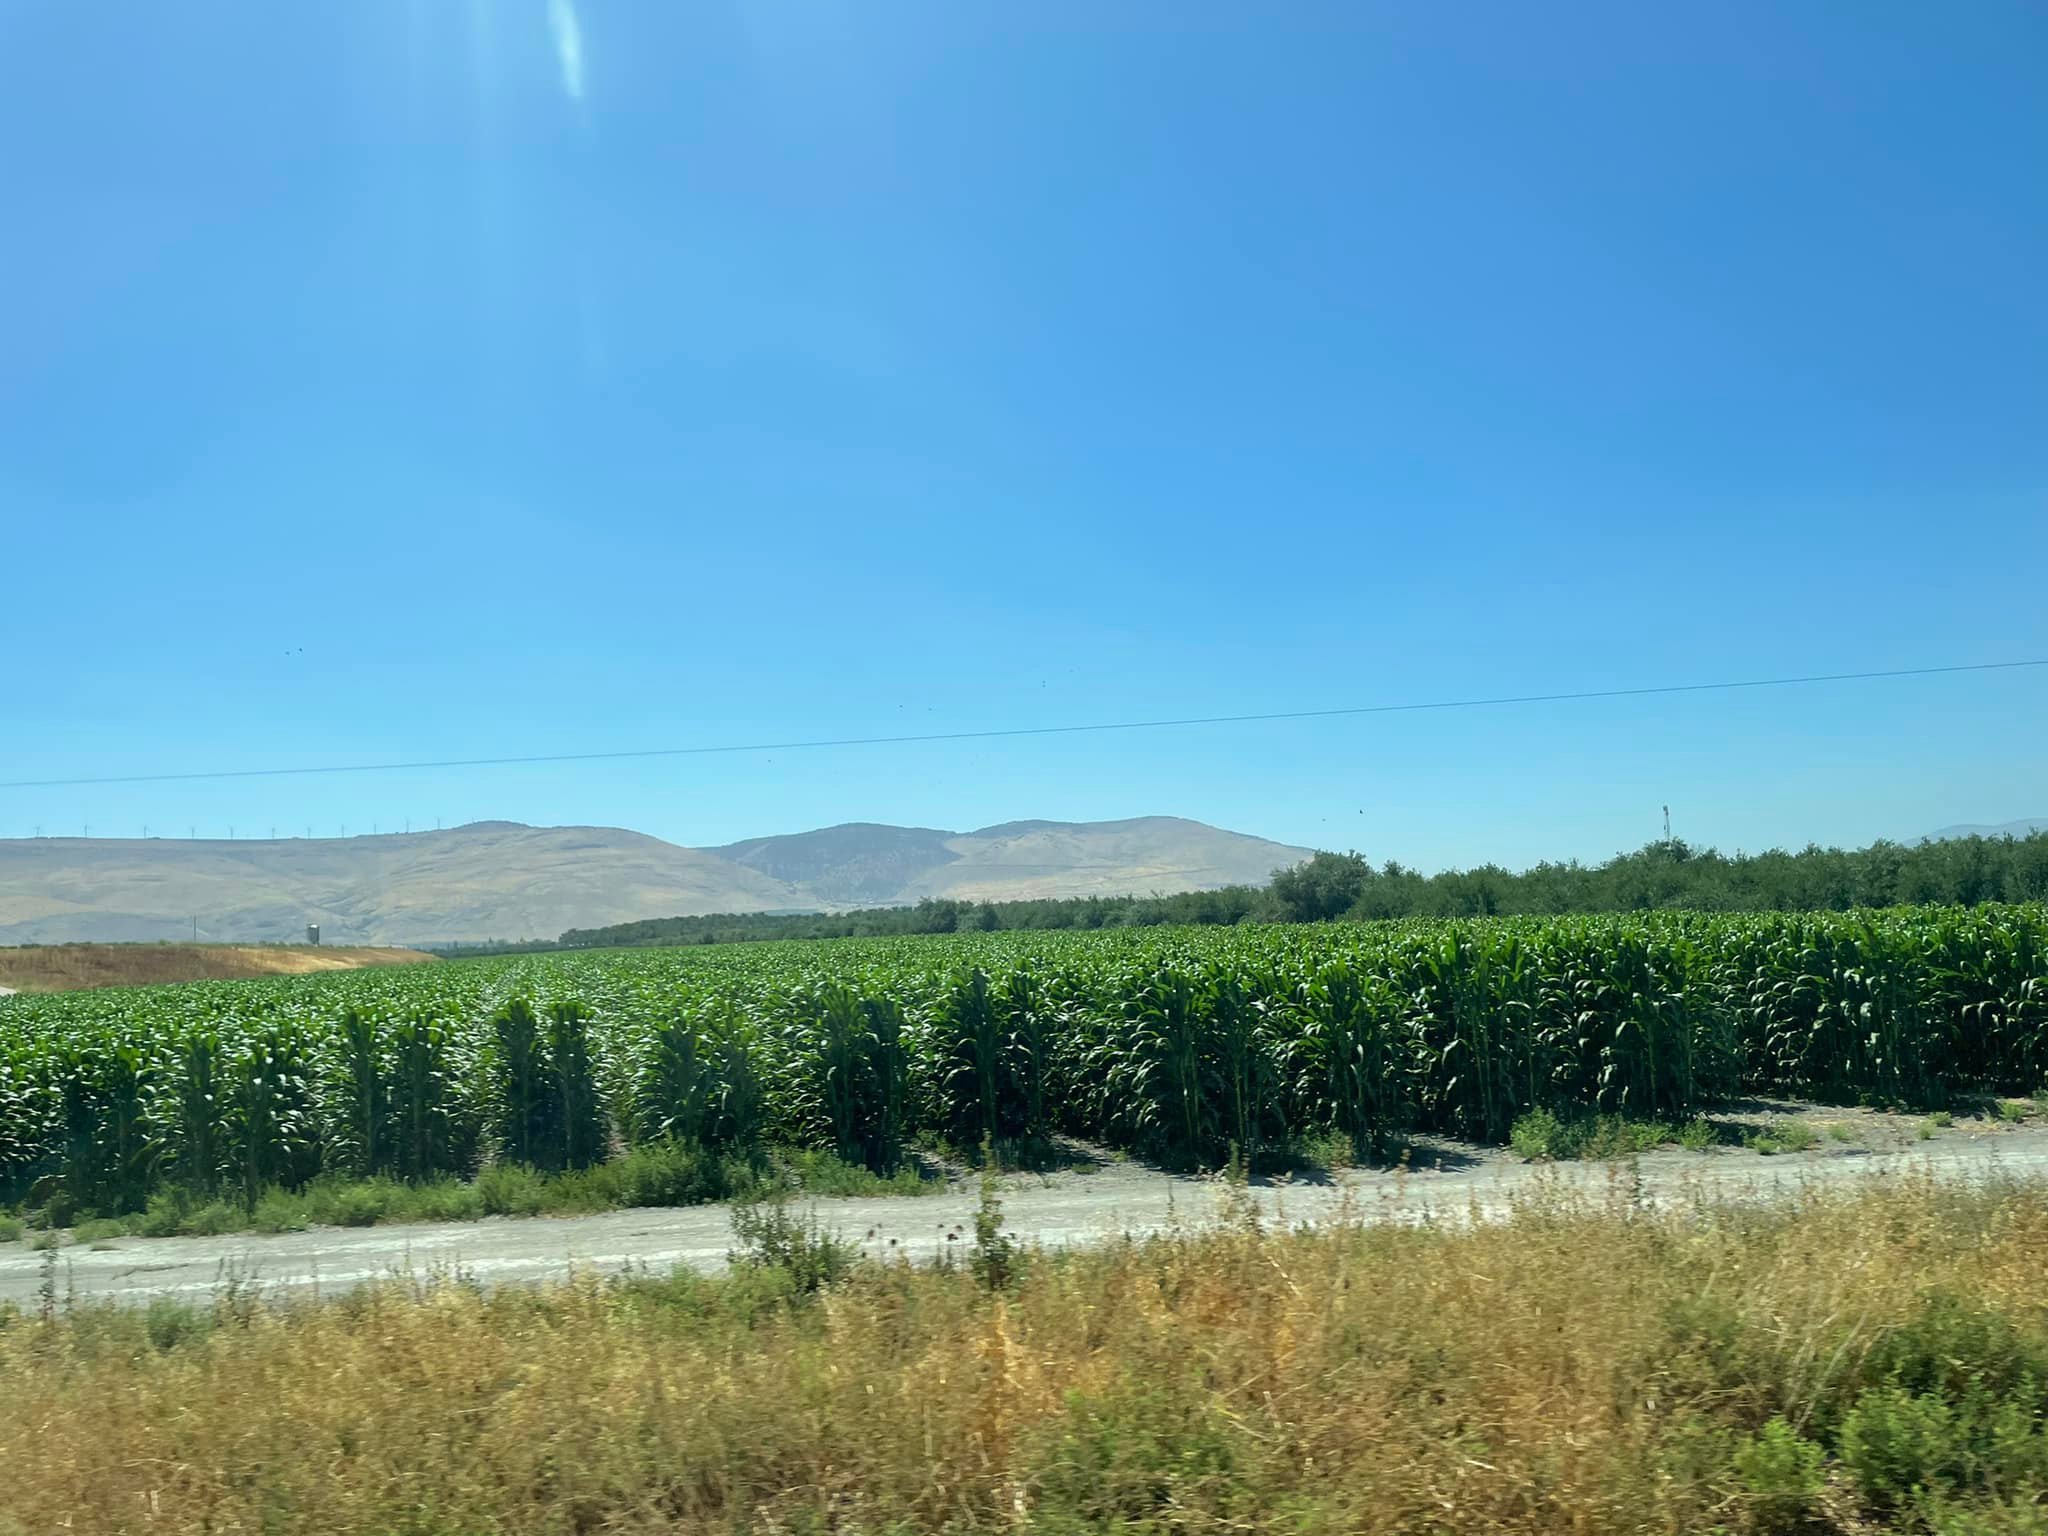  Driving south along the Jordan. The mountains in the distance are in the country of Jordan. The Valley is lush now because of Israeli cultivation. Israel also works with Jordan to develop the Jordanian side of the river. 